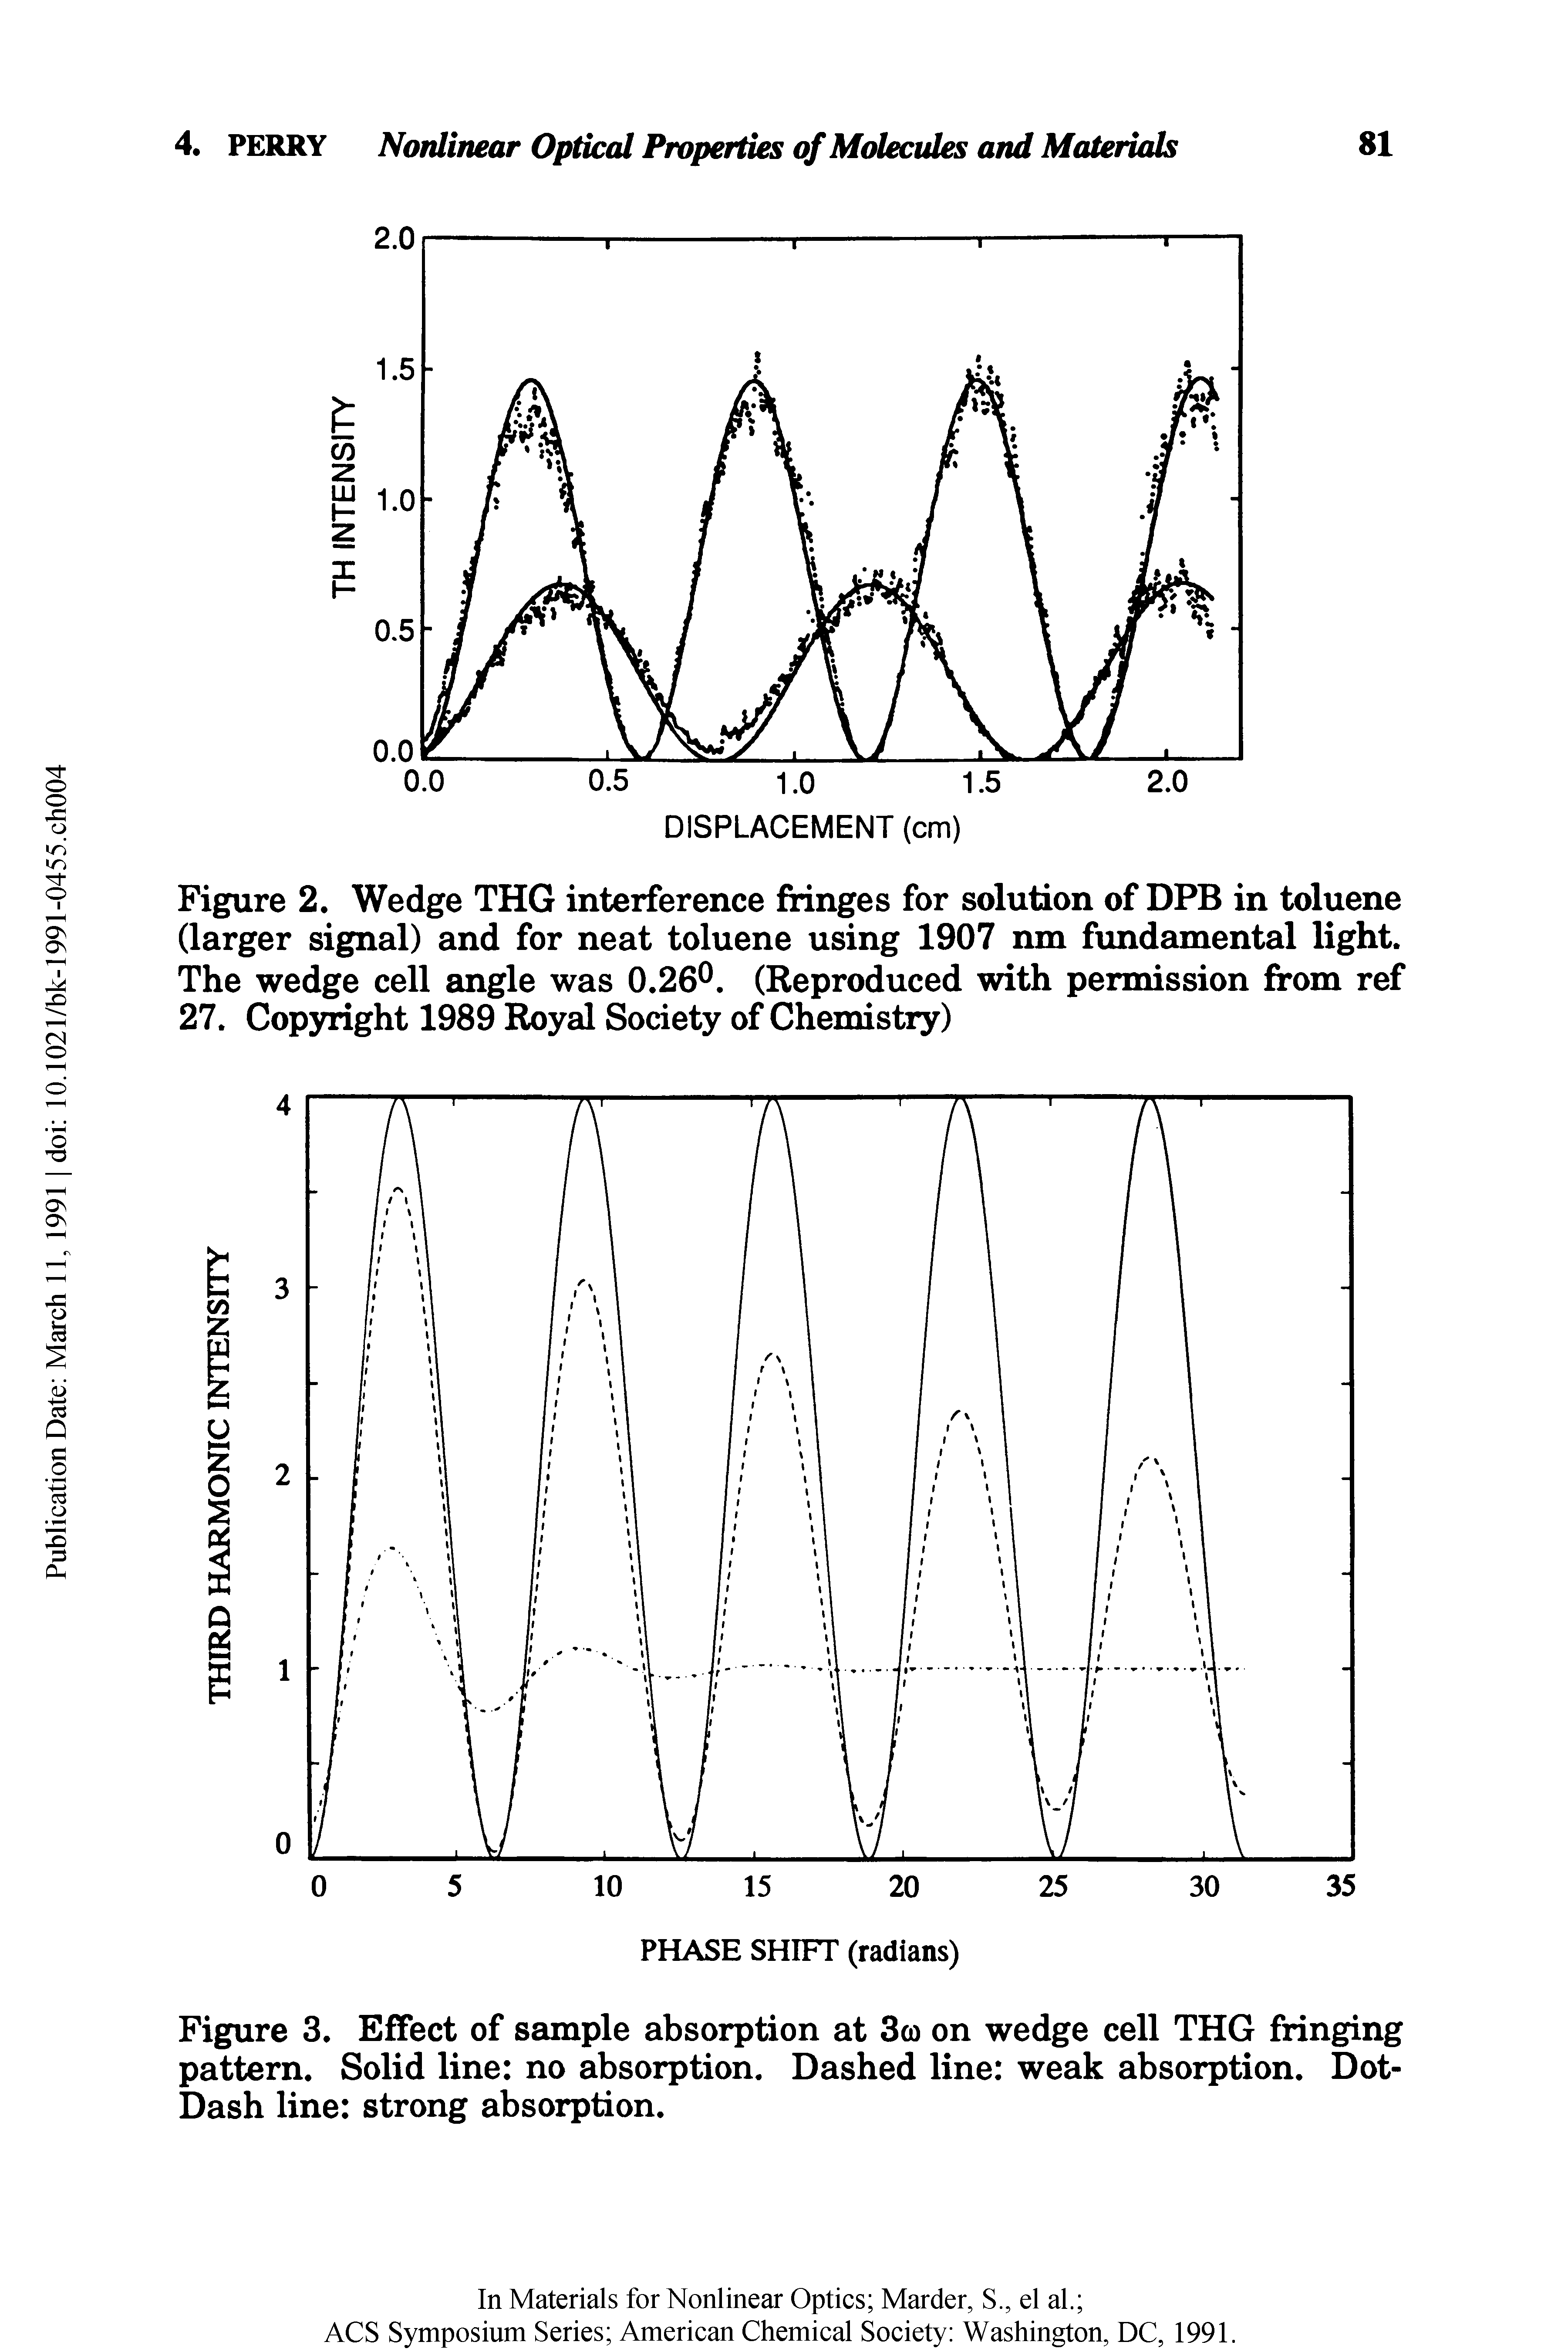 Figure 3. Effect of sample absorption at 3co on wedge cell THG fringing pattern. Solid line no absorption. Dashed line weak absorption. Dot-Dash line strong absorption.